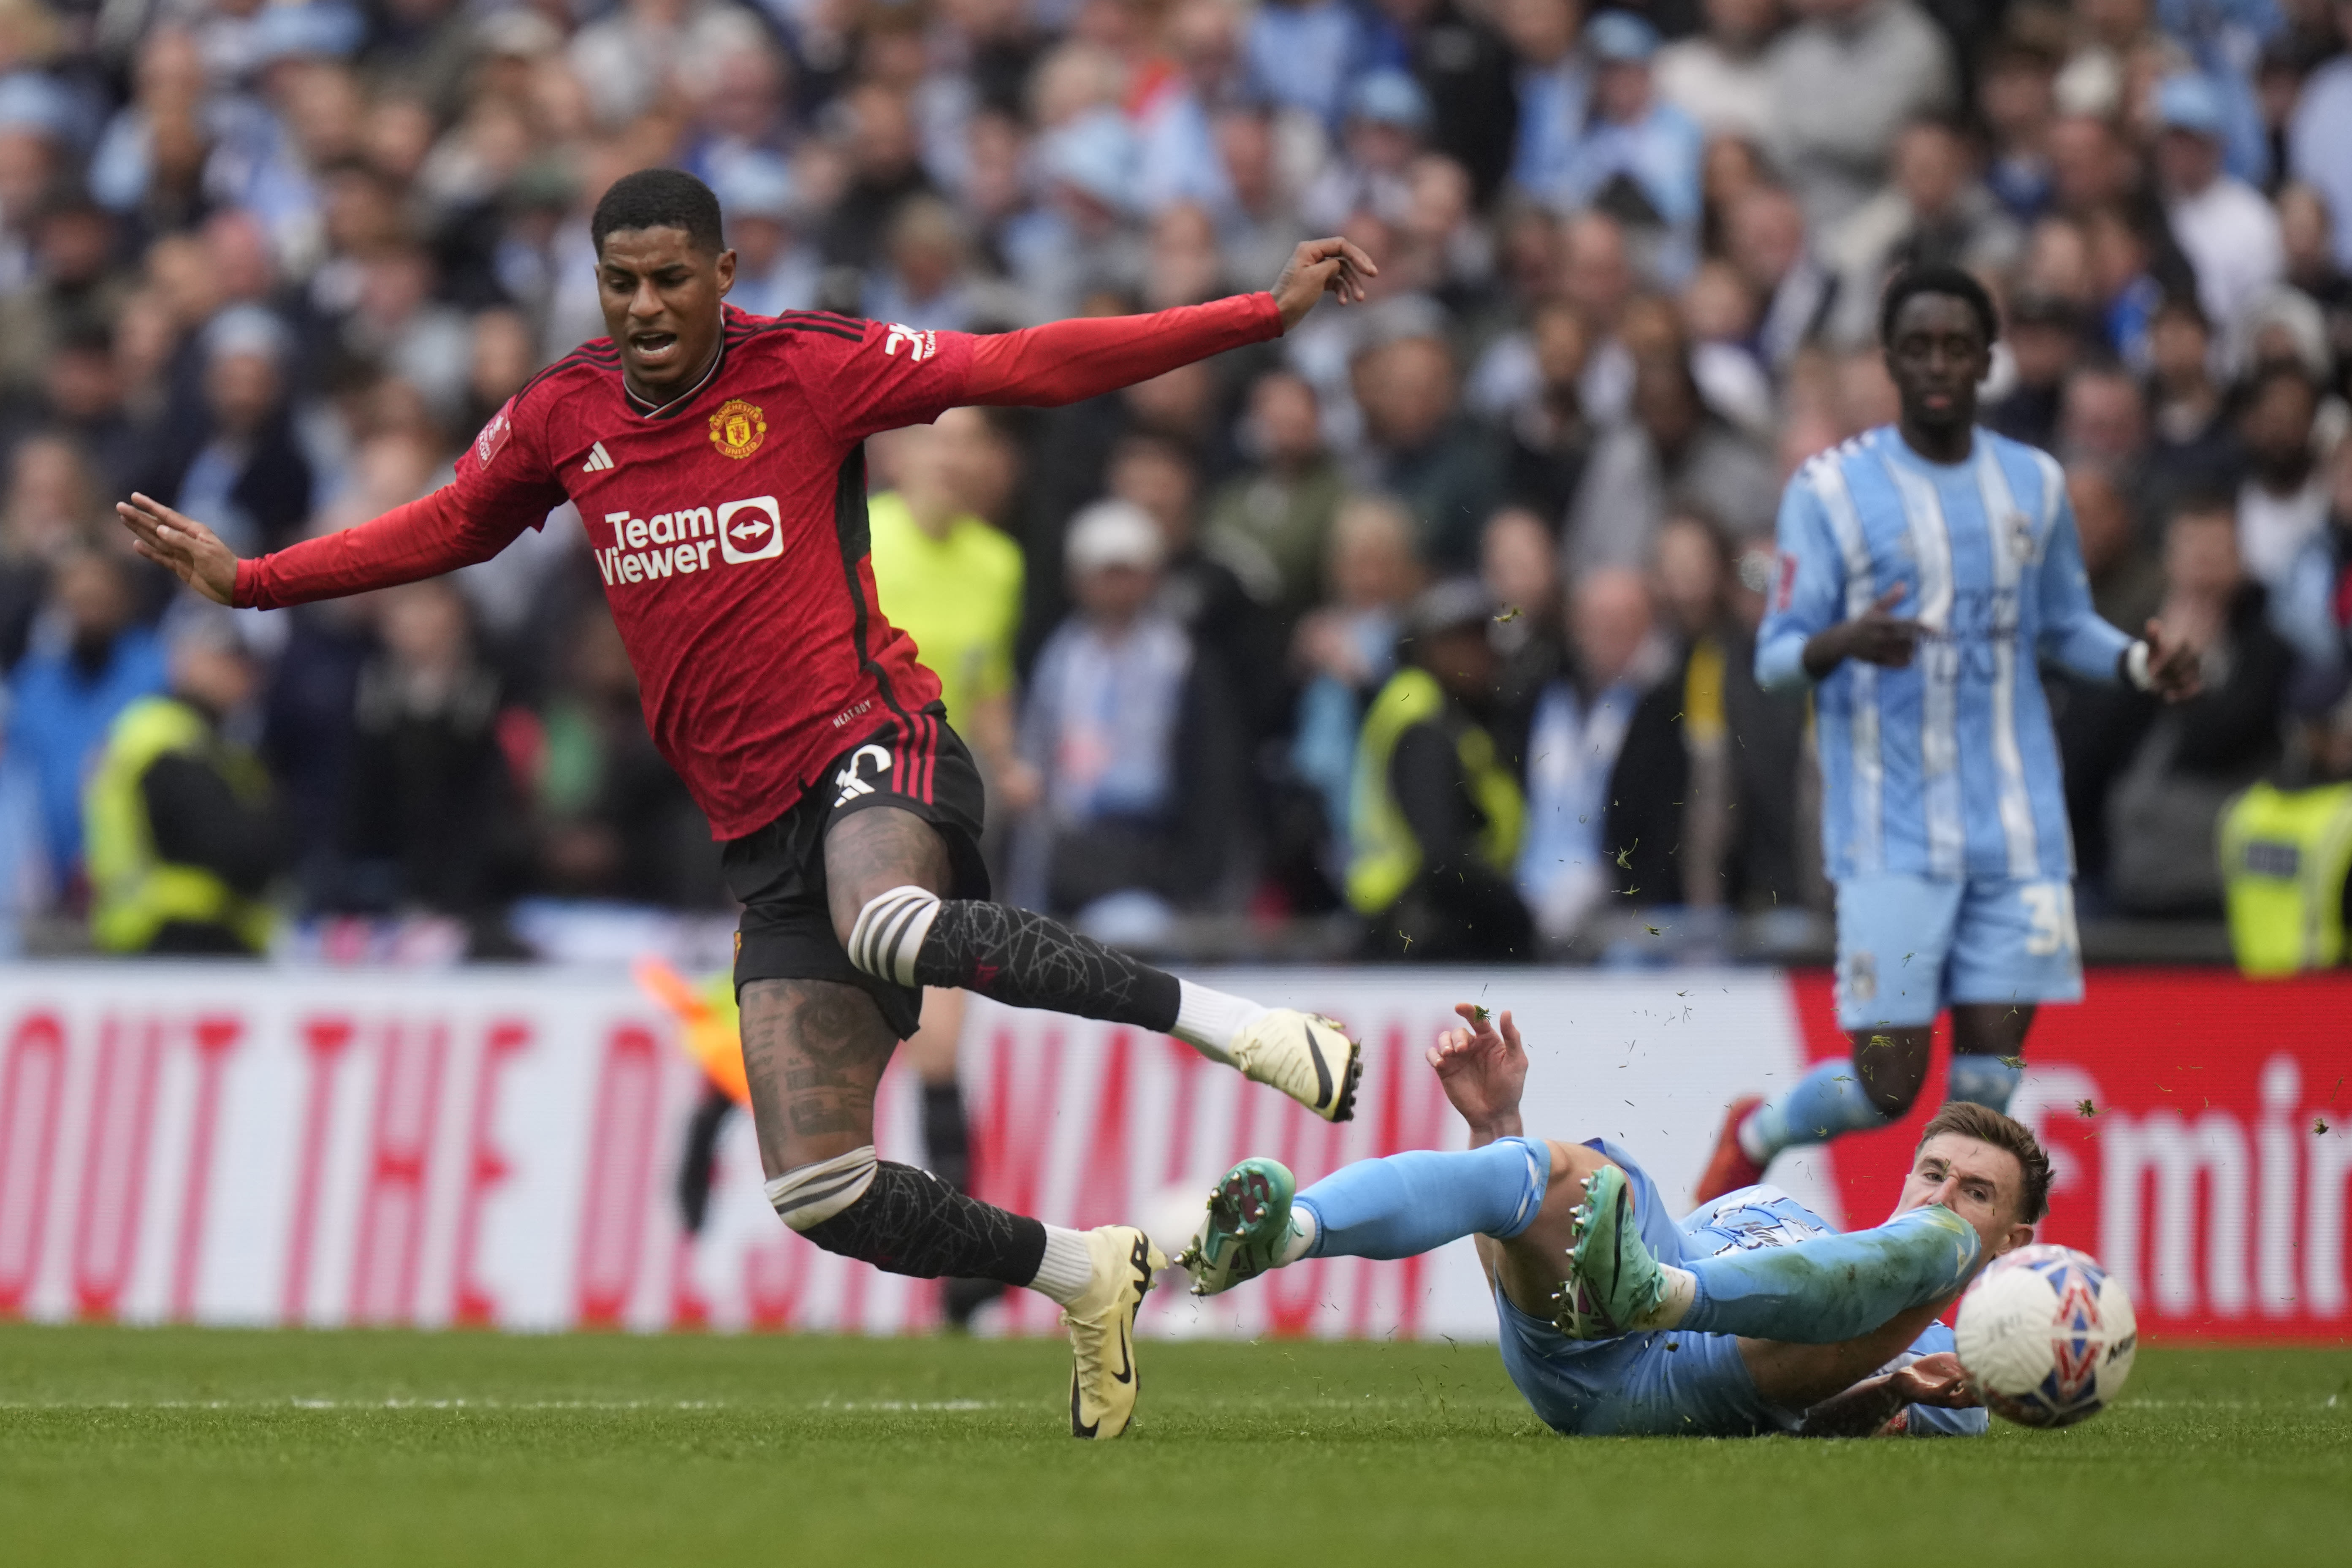 Man United's Rashford left out of England's provisional Euro 2024 squad after disappointing season